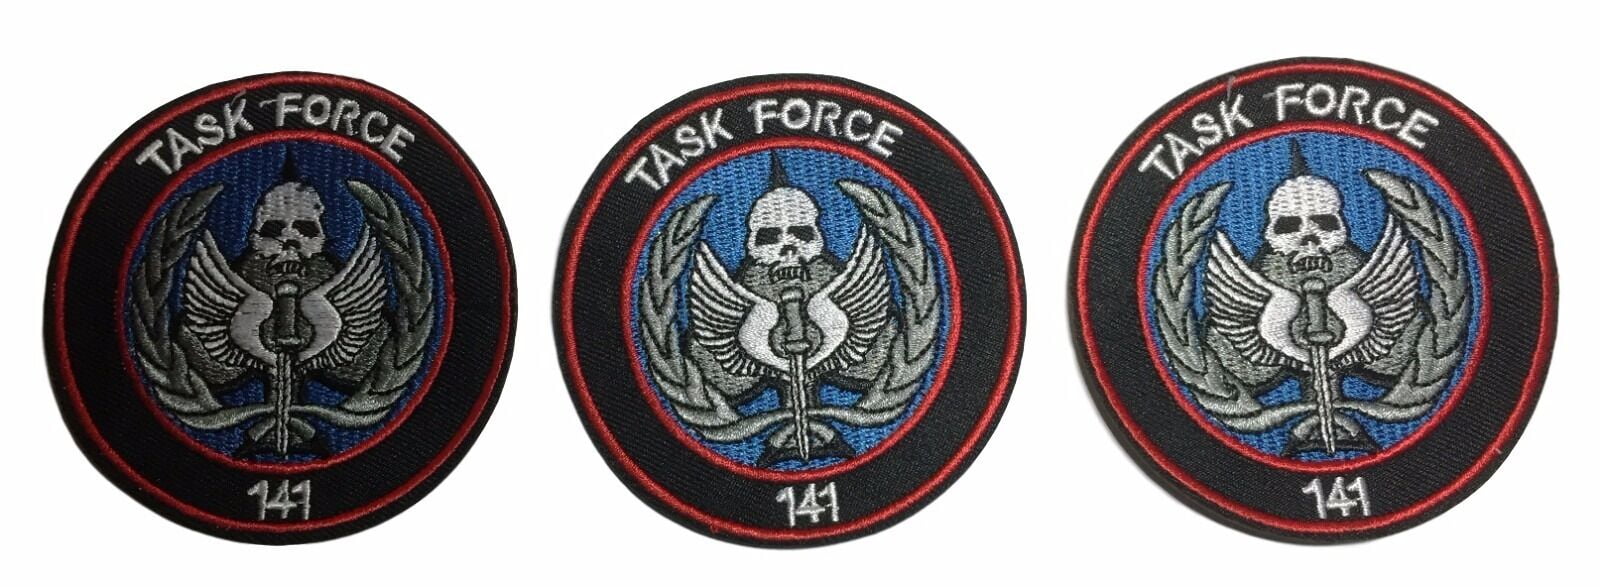 TASK FORCE 141 Patch Modern Warfare OPS PS3 XBOX MW3 Call of Duty Black IRON ON